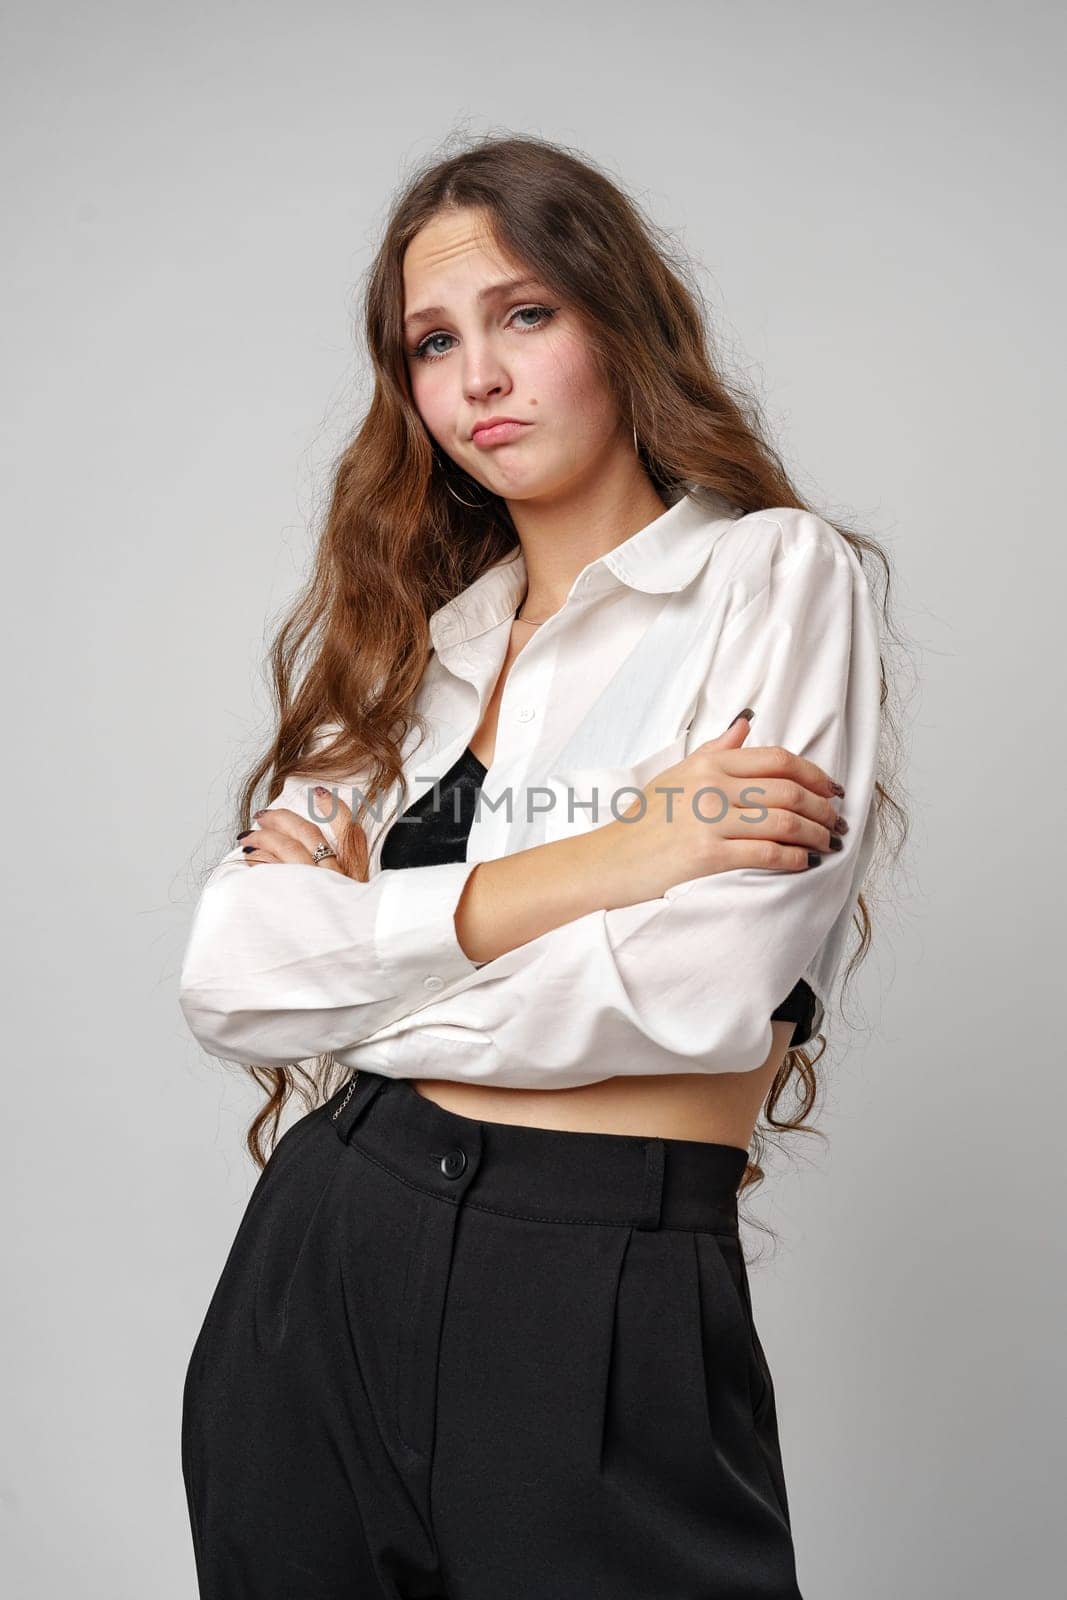 A young woman with long, wavy brown hair and light makeup exhibits a playful yet melancholic pout. She is wearing a casual white button-up shirt, with the top buttons undone, giving the impression of a relaxed or end-of-day mood. The backdrop is plain and grey, drawing full focus to her expressive face.